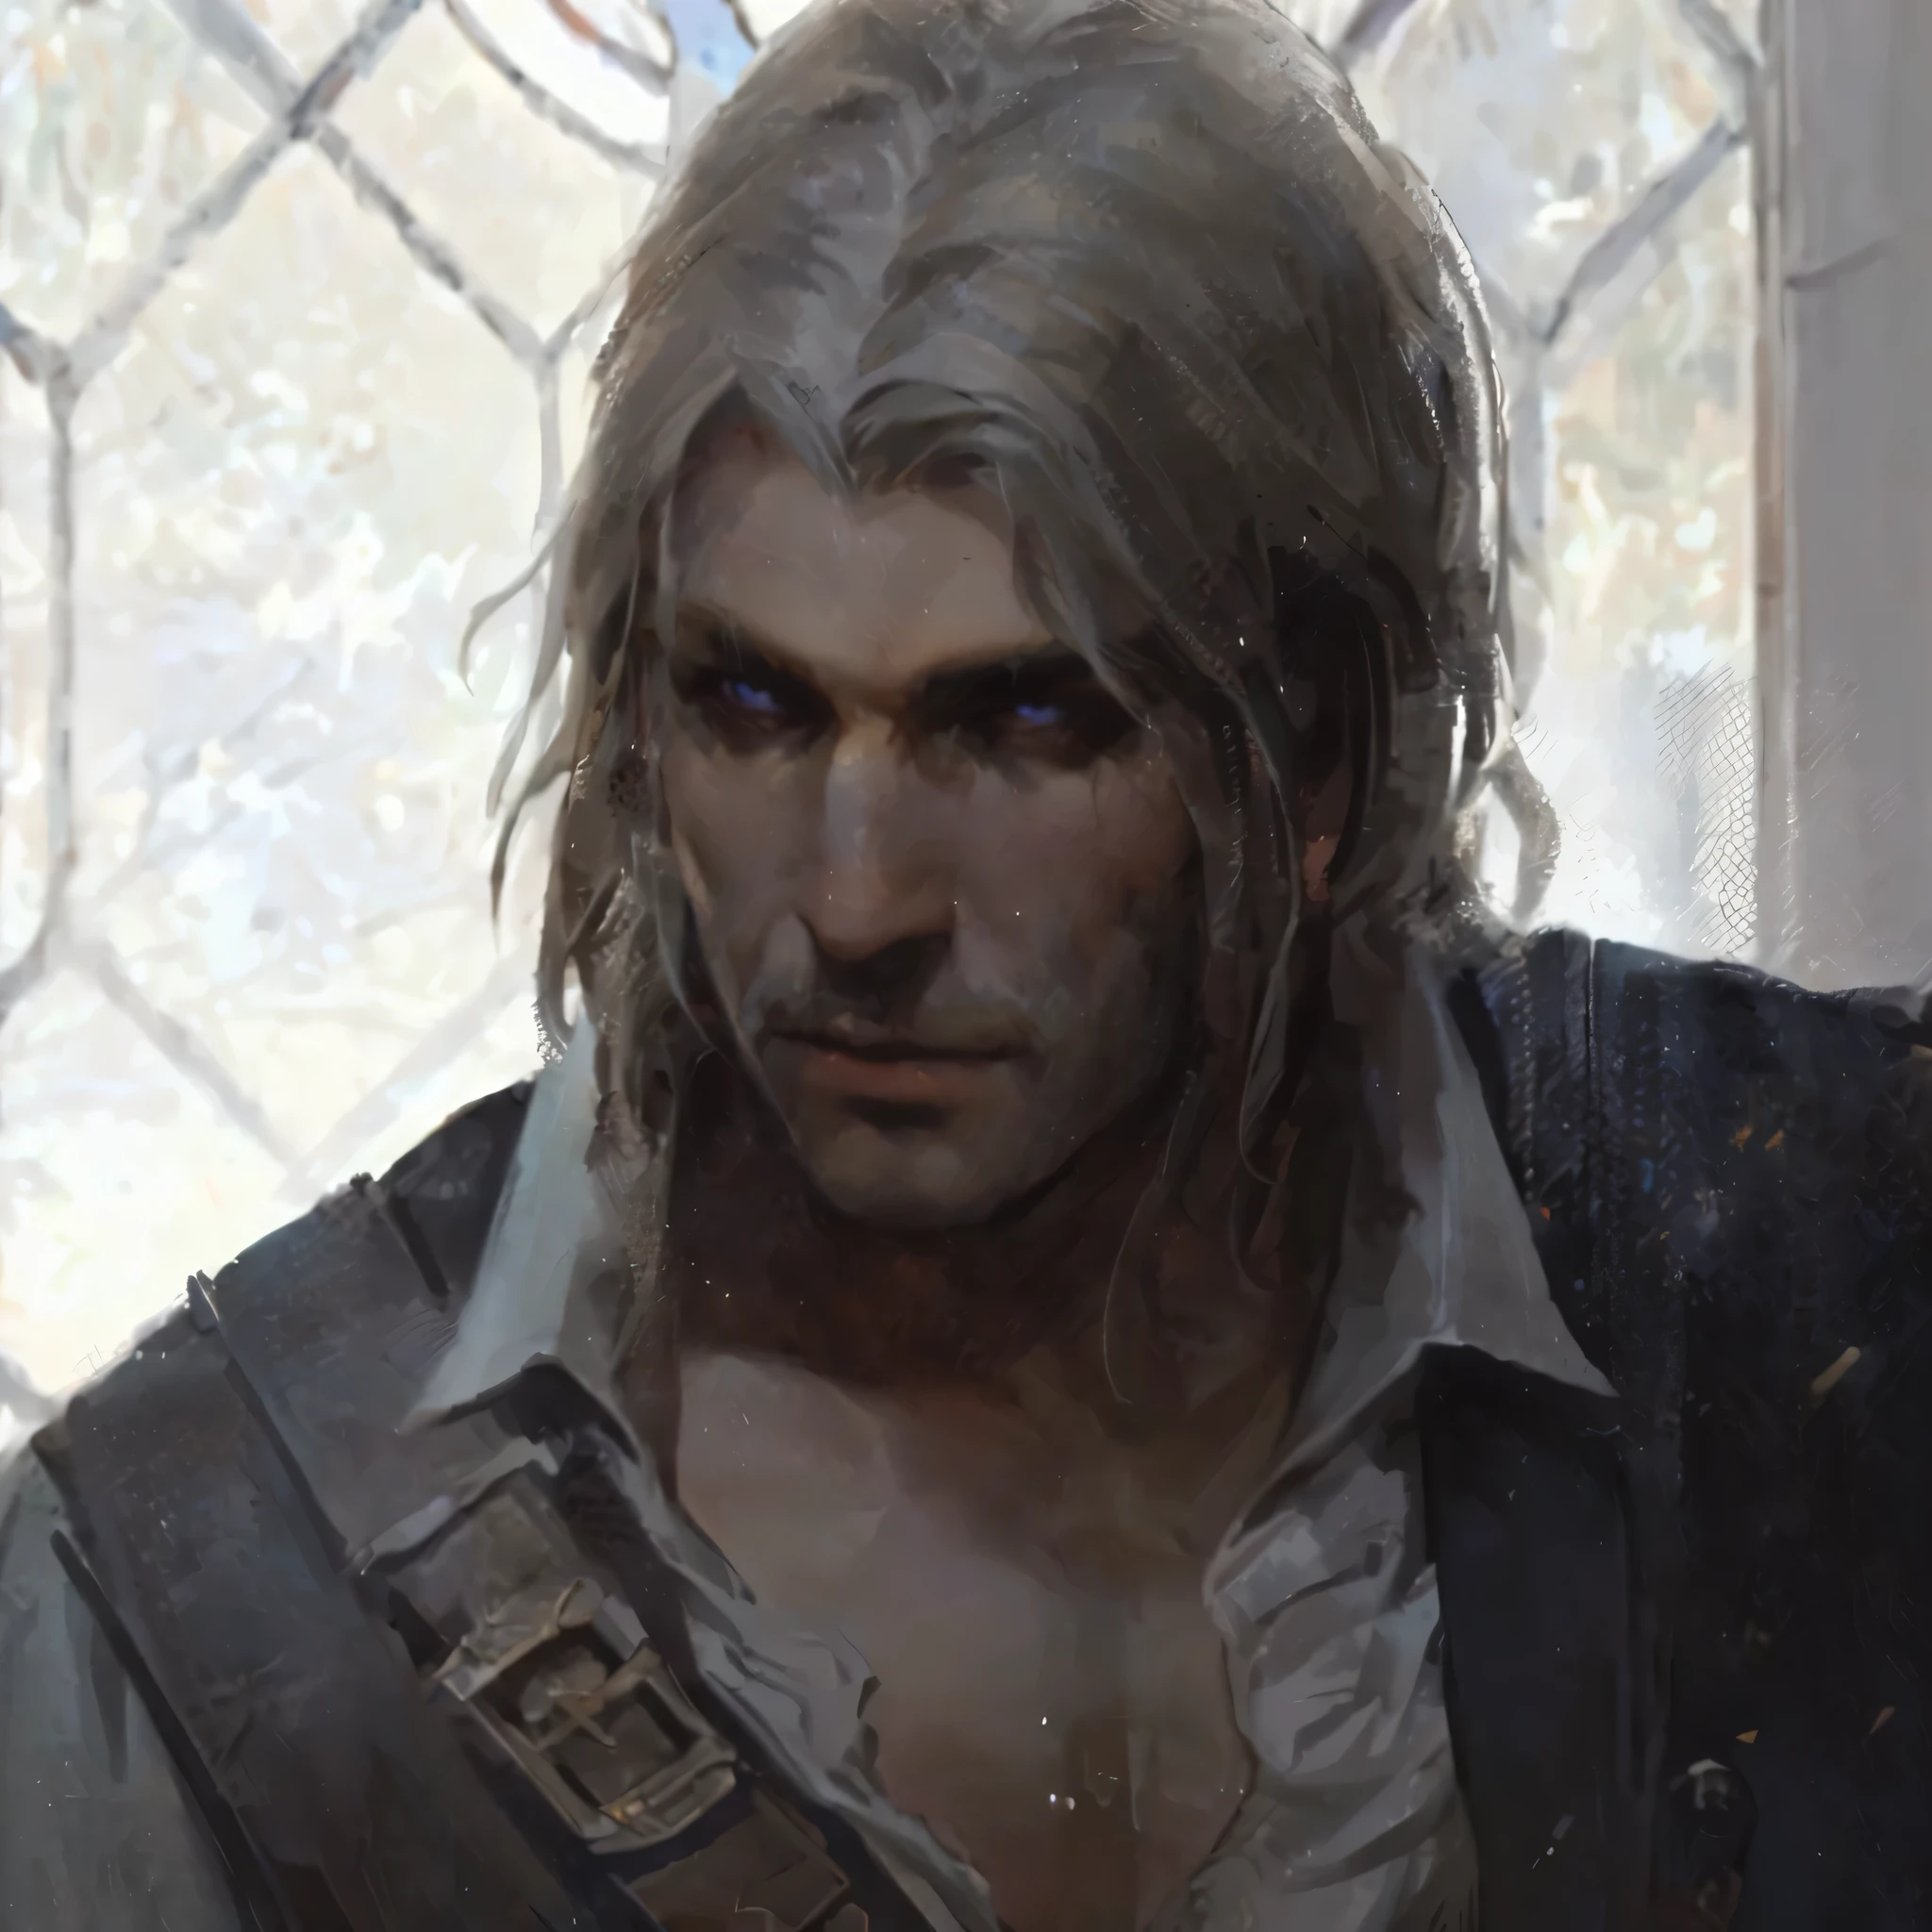 Have long hair、Man in a vest, portrait of Geralt of rivia, the that wizard concept art, Geralt of rivia, Geralt, portrait of fin wildcloak, that wizard)), that wizard, fantasy male portrait, from that wizard (2021), ciri, Works of art in the style of Guwitz, the that wizard